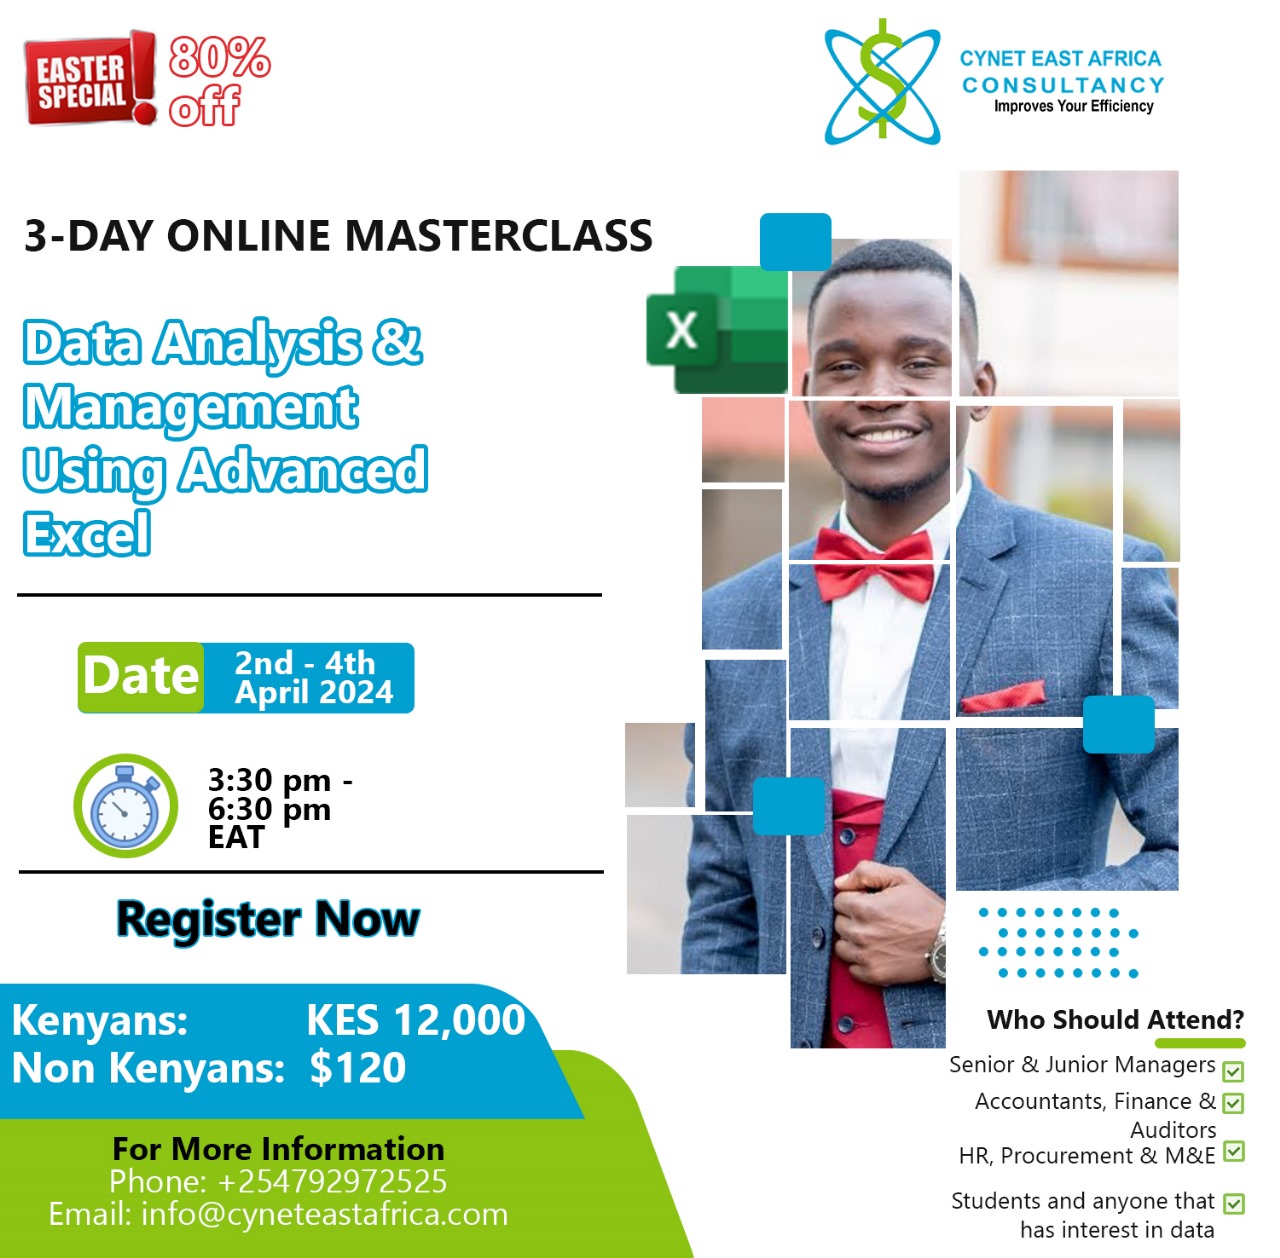 3-Day Online Masterclass on Data Analysis and Management using Advanced Excel